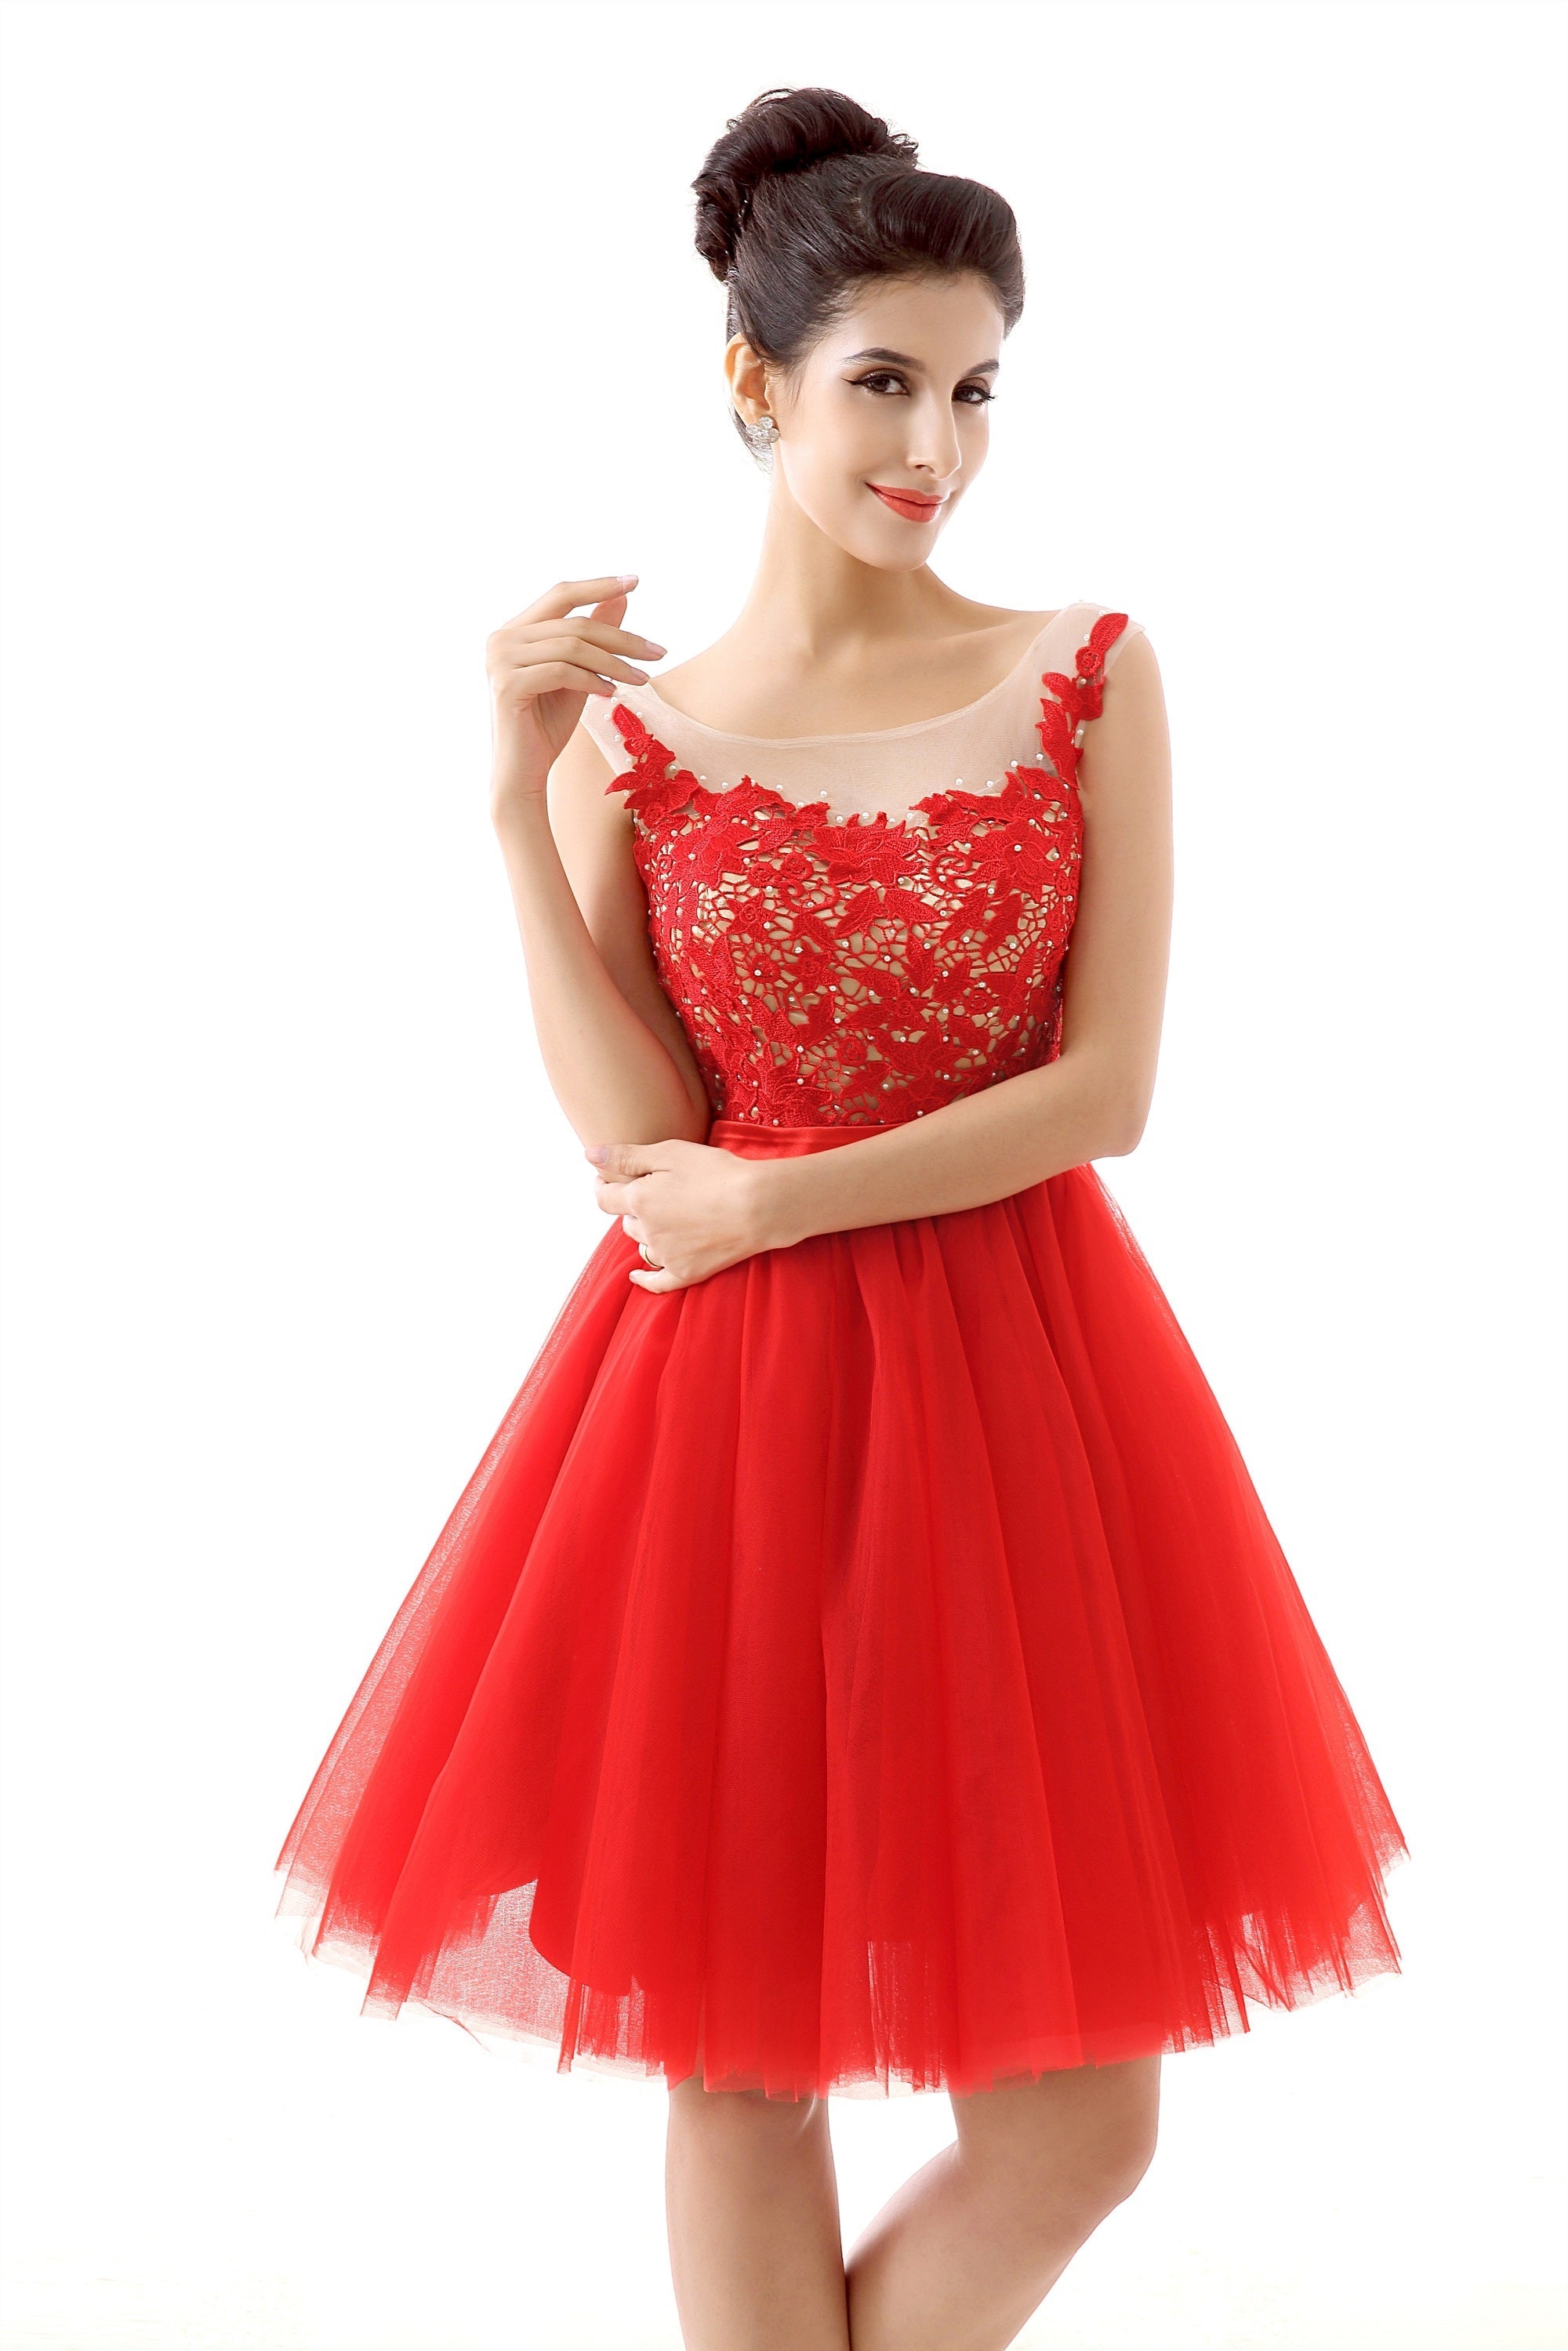 Lace Cute Red Short Corset Homecoming Dresses outfit, Party Dress Miami